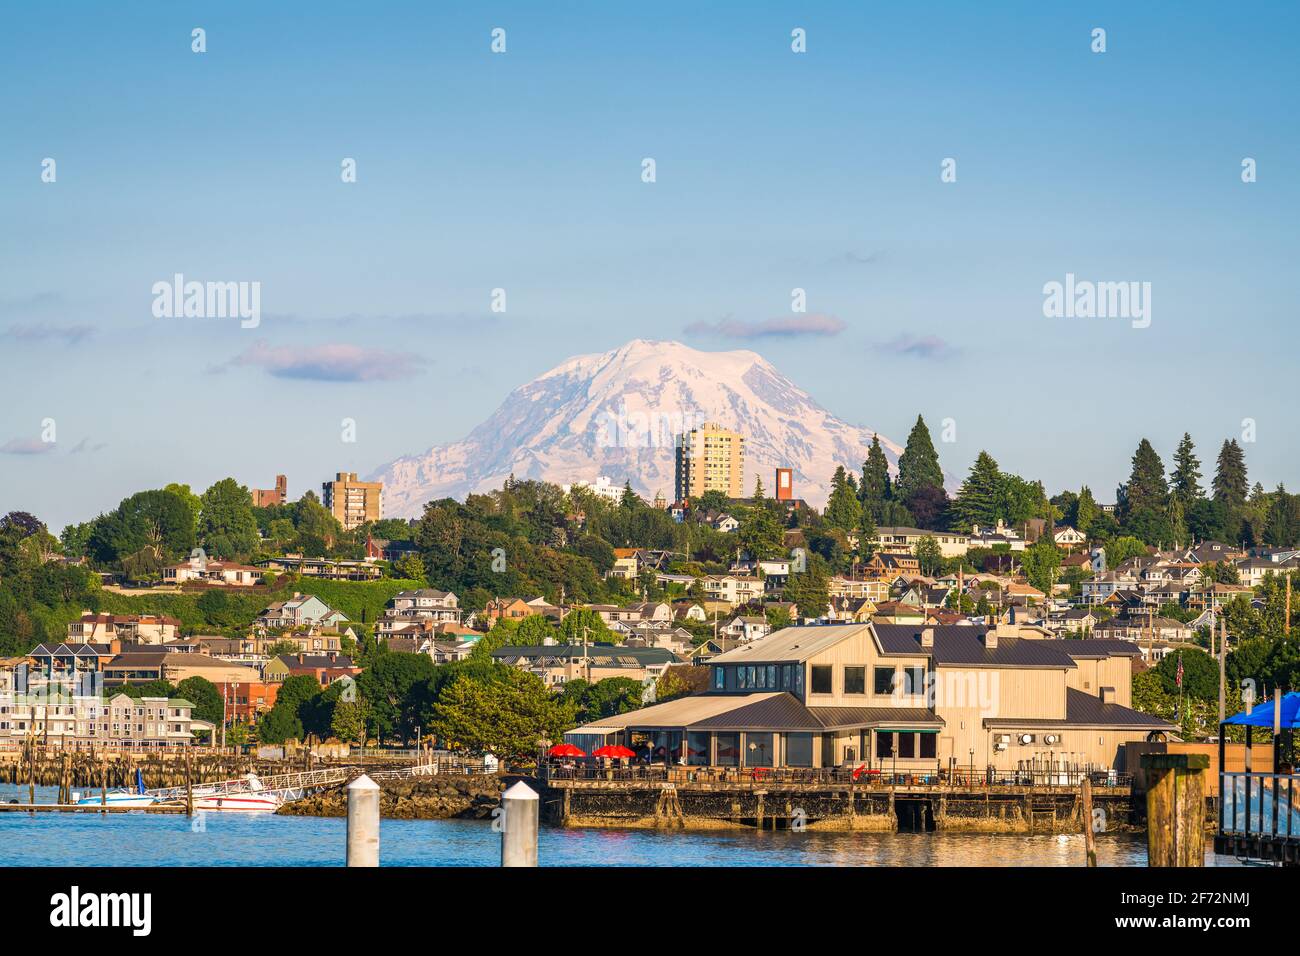 Tacoma, Washington, USA with Mt. Rainier in the distance on Commencement Bay. Stock Photo